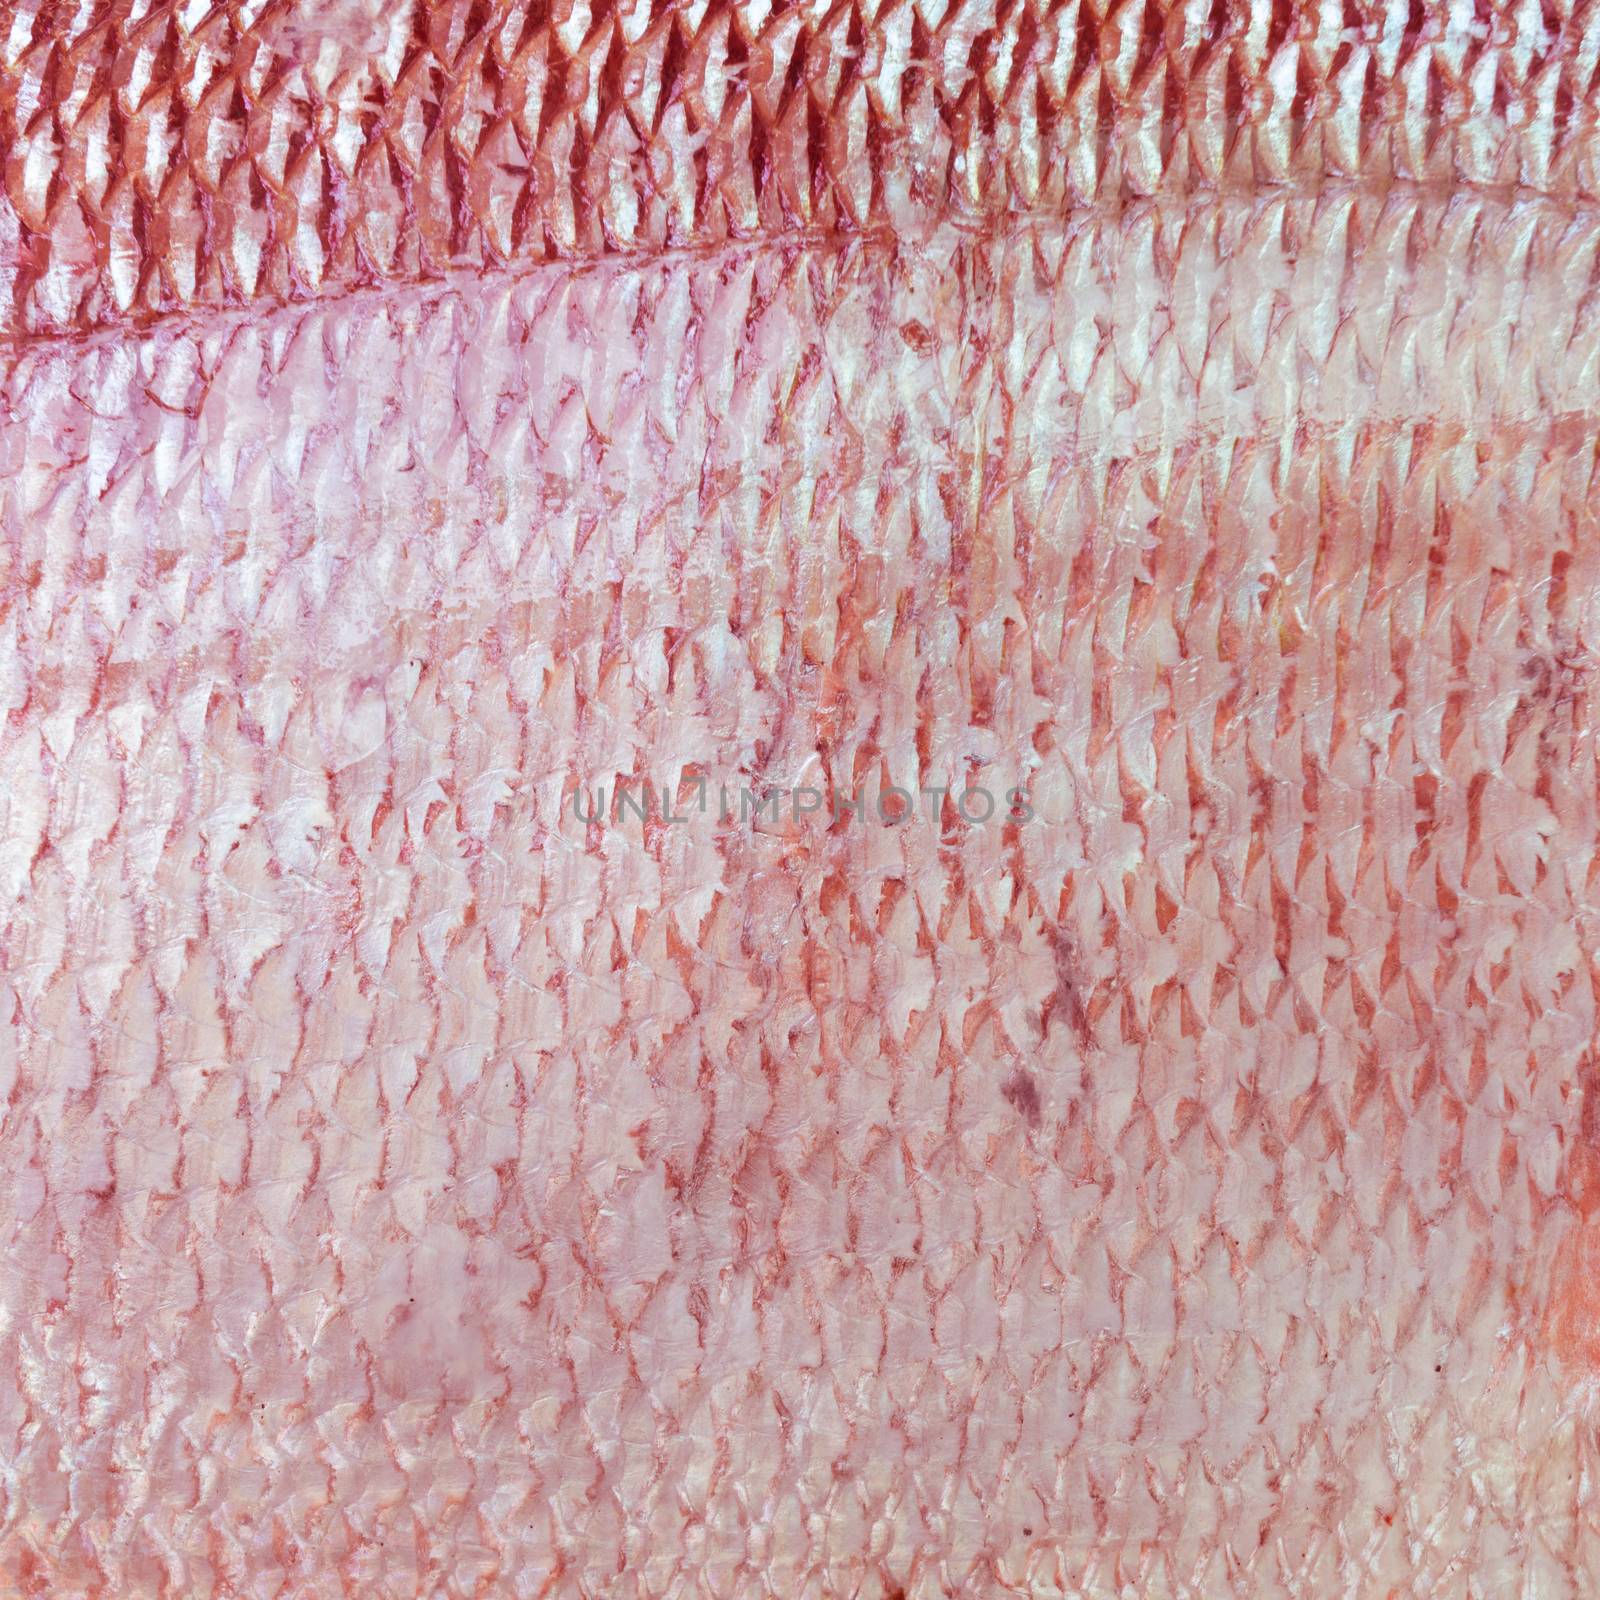 Texture of fish skin use for background